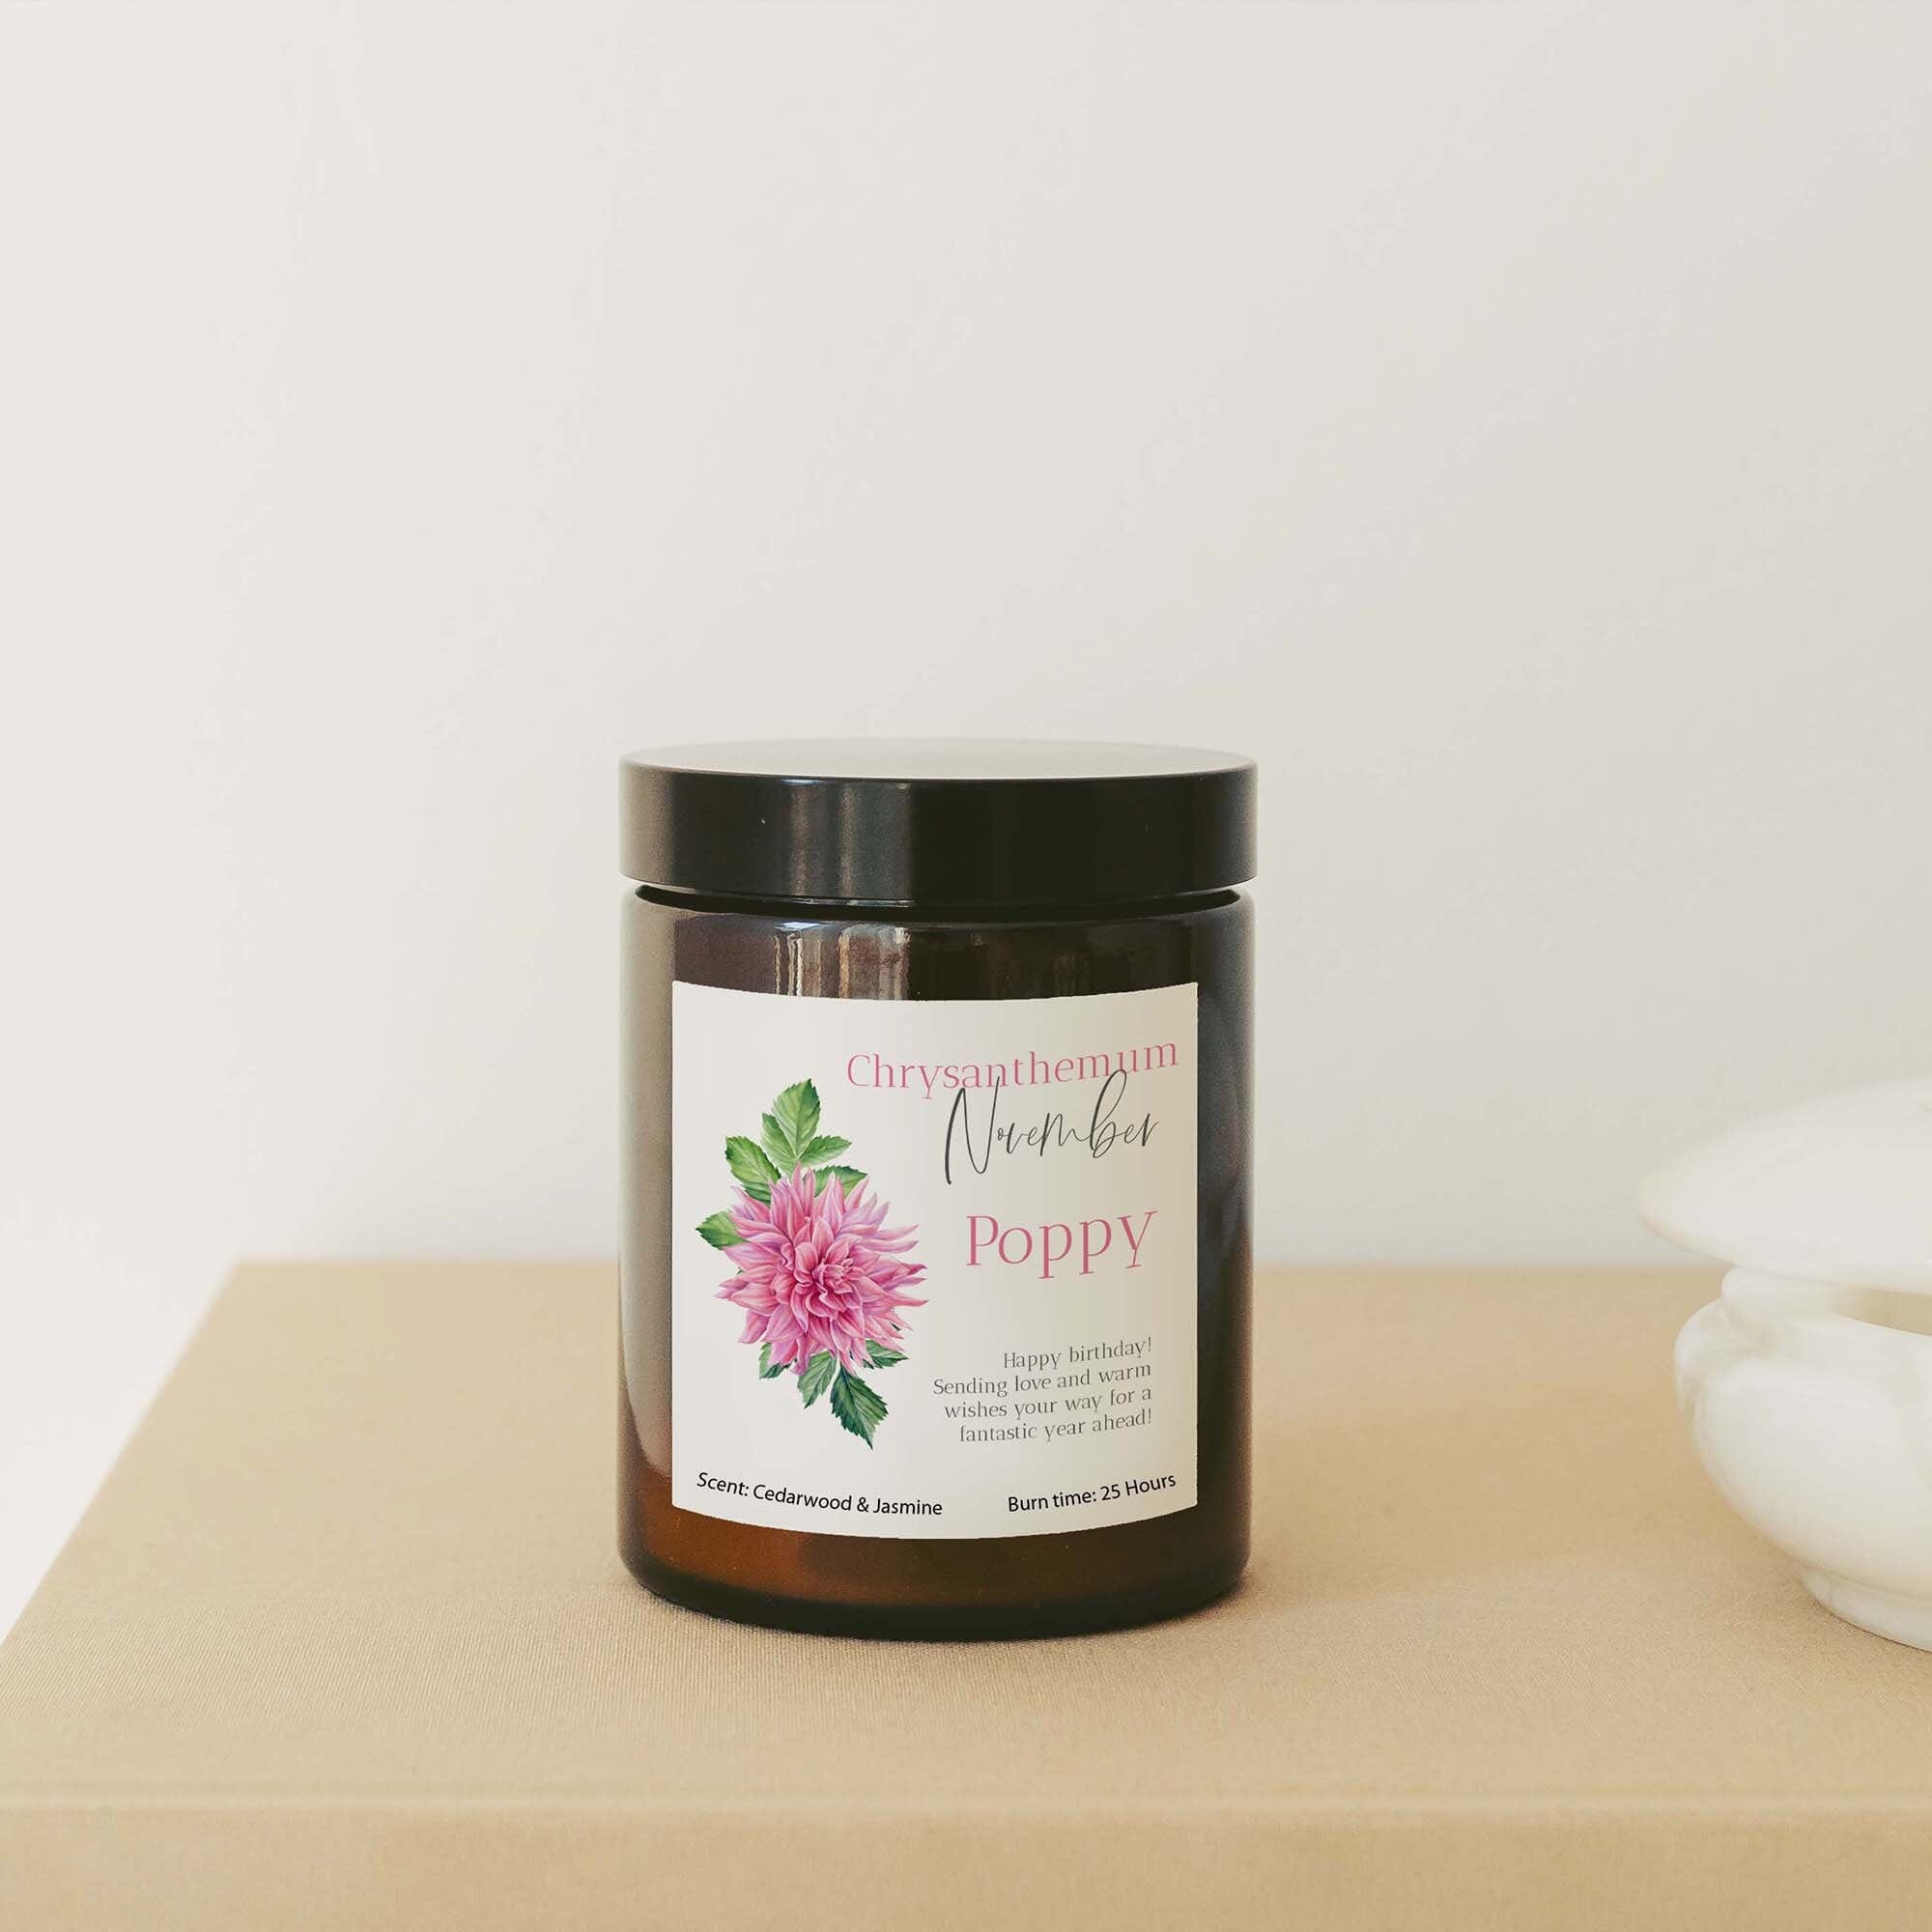 Personalised November Birth Flower Gift Candle with your message, Birthday Gift for Her